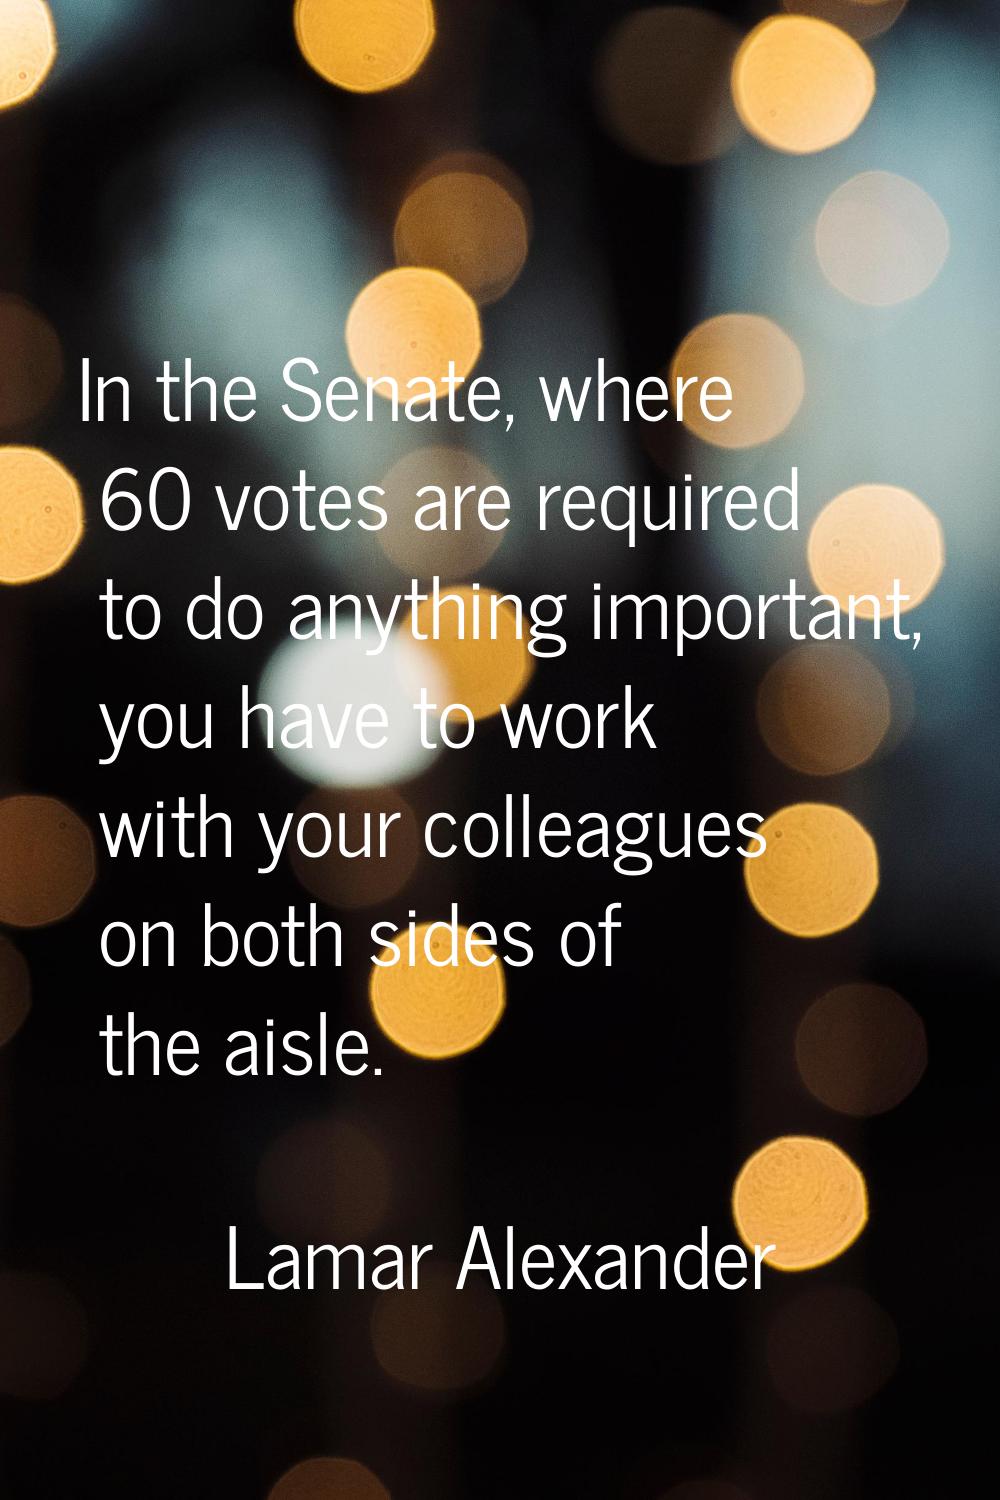 In the Senate, where 60 votes are required to do anything important, you have to work with your col